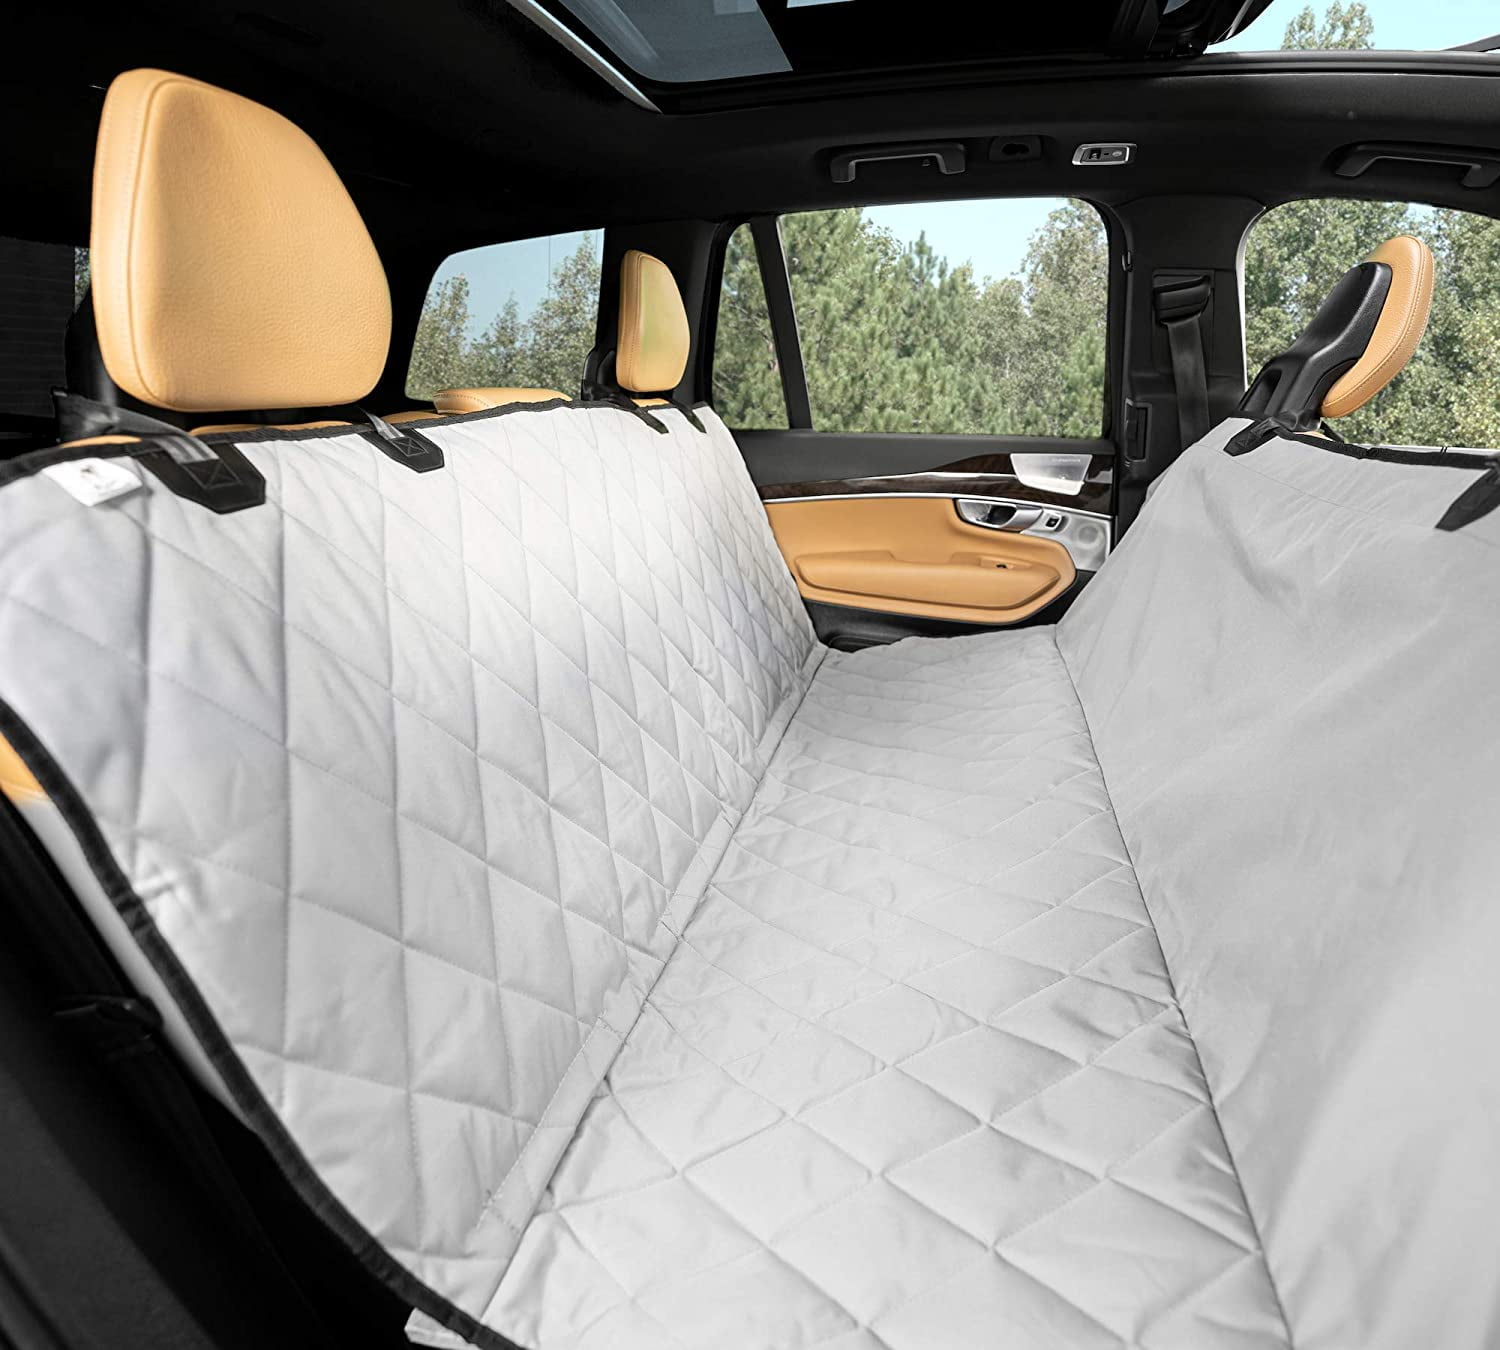 SeatShield Backseat Cover for Dogs | Seat Cover | Pet Protector